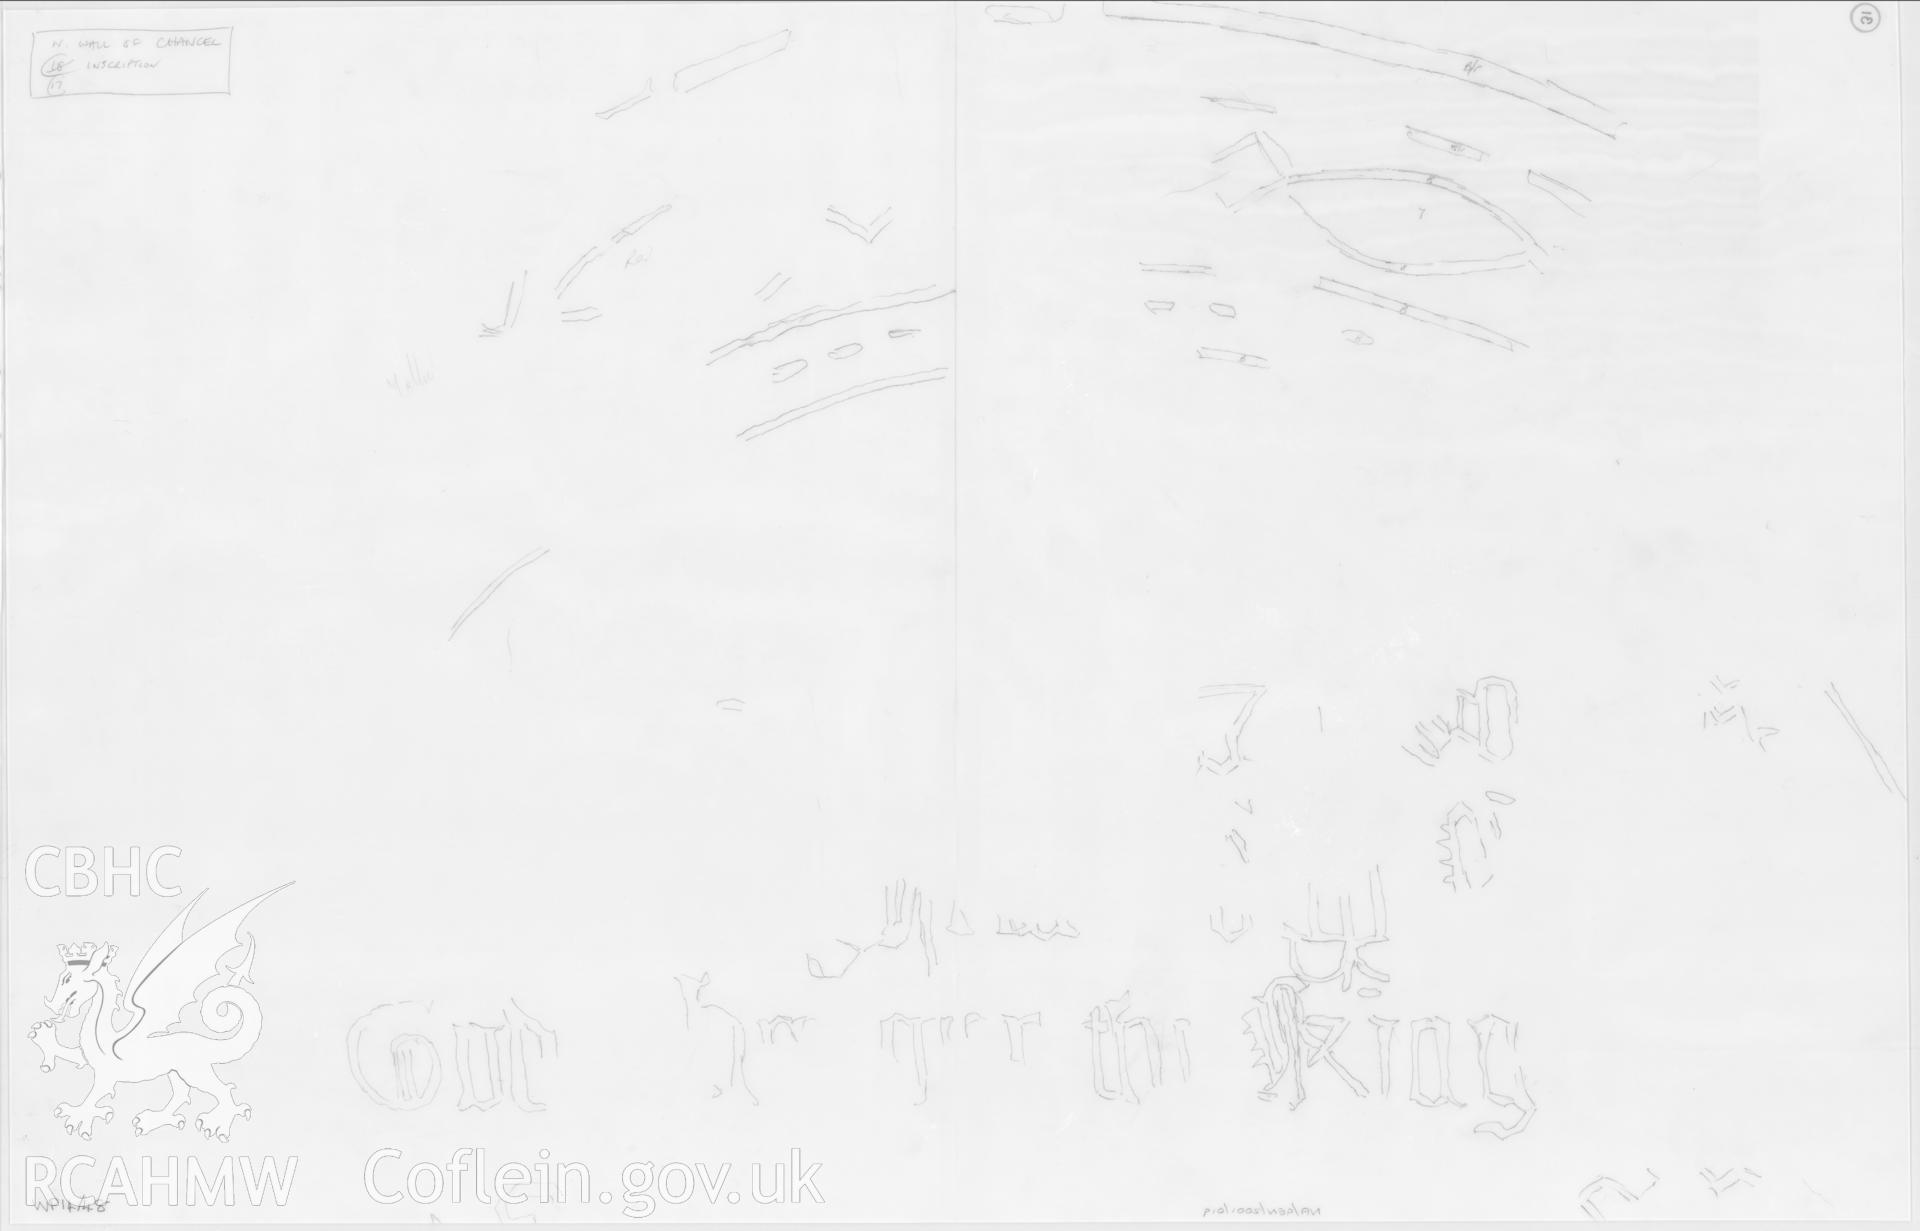 Provisional sketch on tracing paper showing the seventeenth century inscription on the north wall of the chancel, in St Teilo's Church, Llandeilo Talybont, produced by D.J. Roberts and A.J. Parkinson, undated.